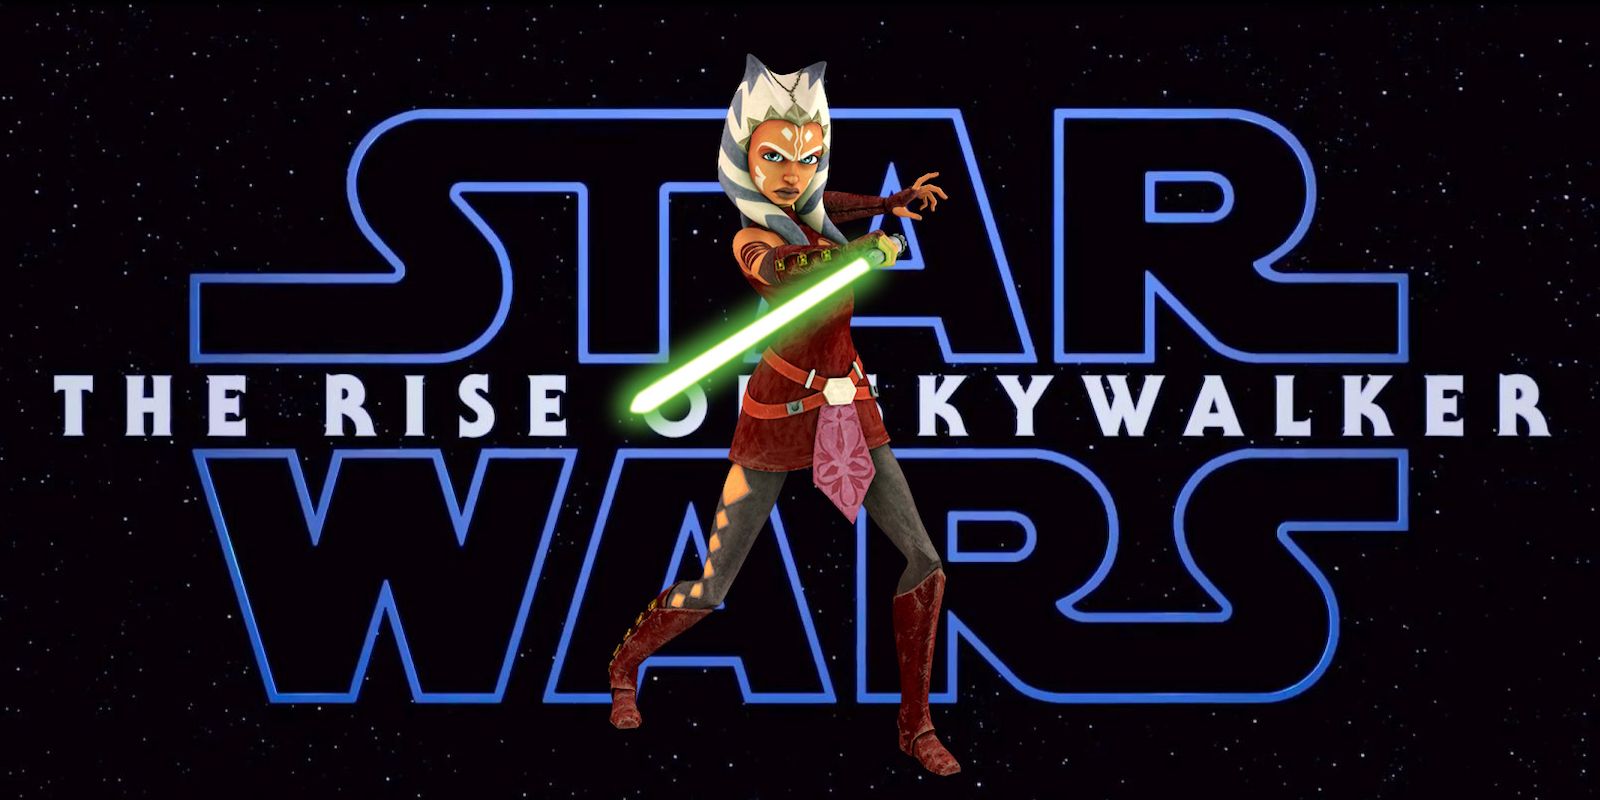 J.J. Abrams hints that Ahsoka Tano may appear in 'Star Wars: The Rise of  Skywalker' - Deseret News